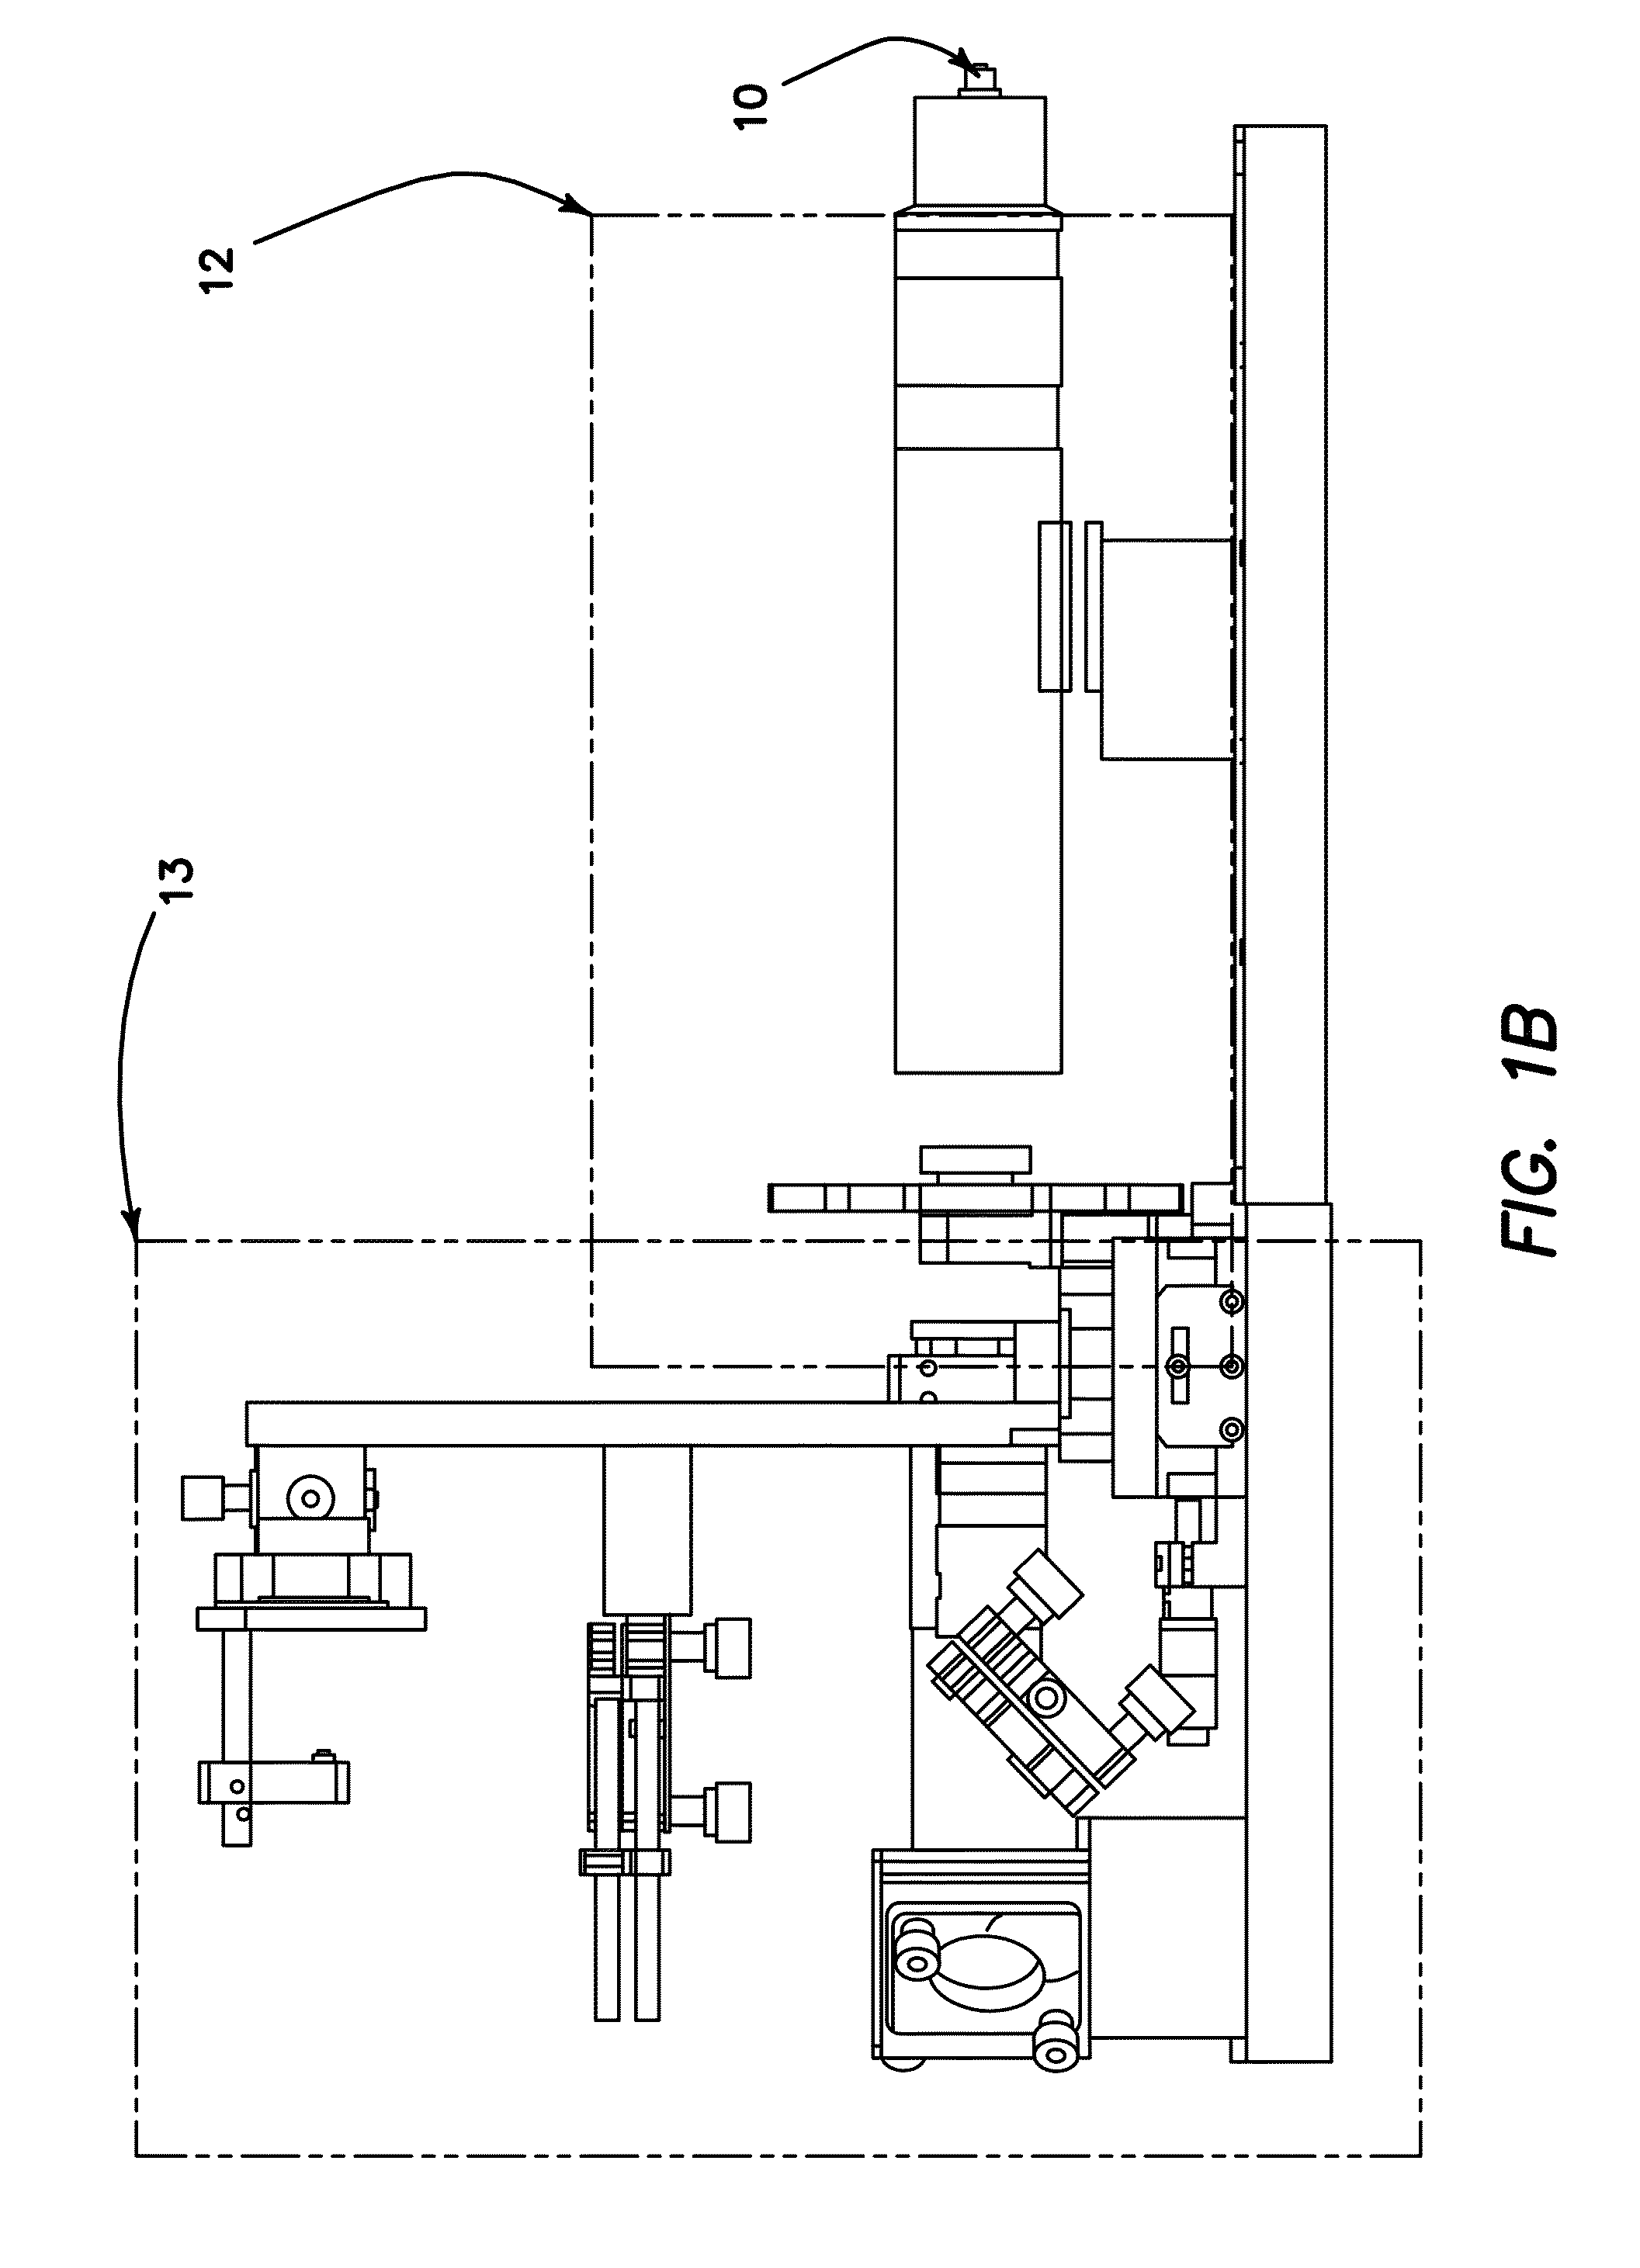 Apparatus and method for an inclined single plane imaging microscope box (ispim box)